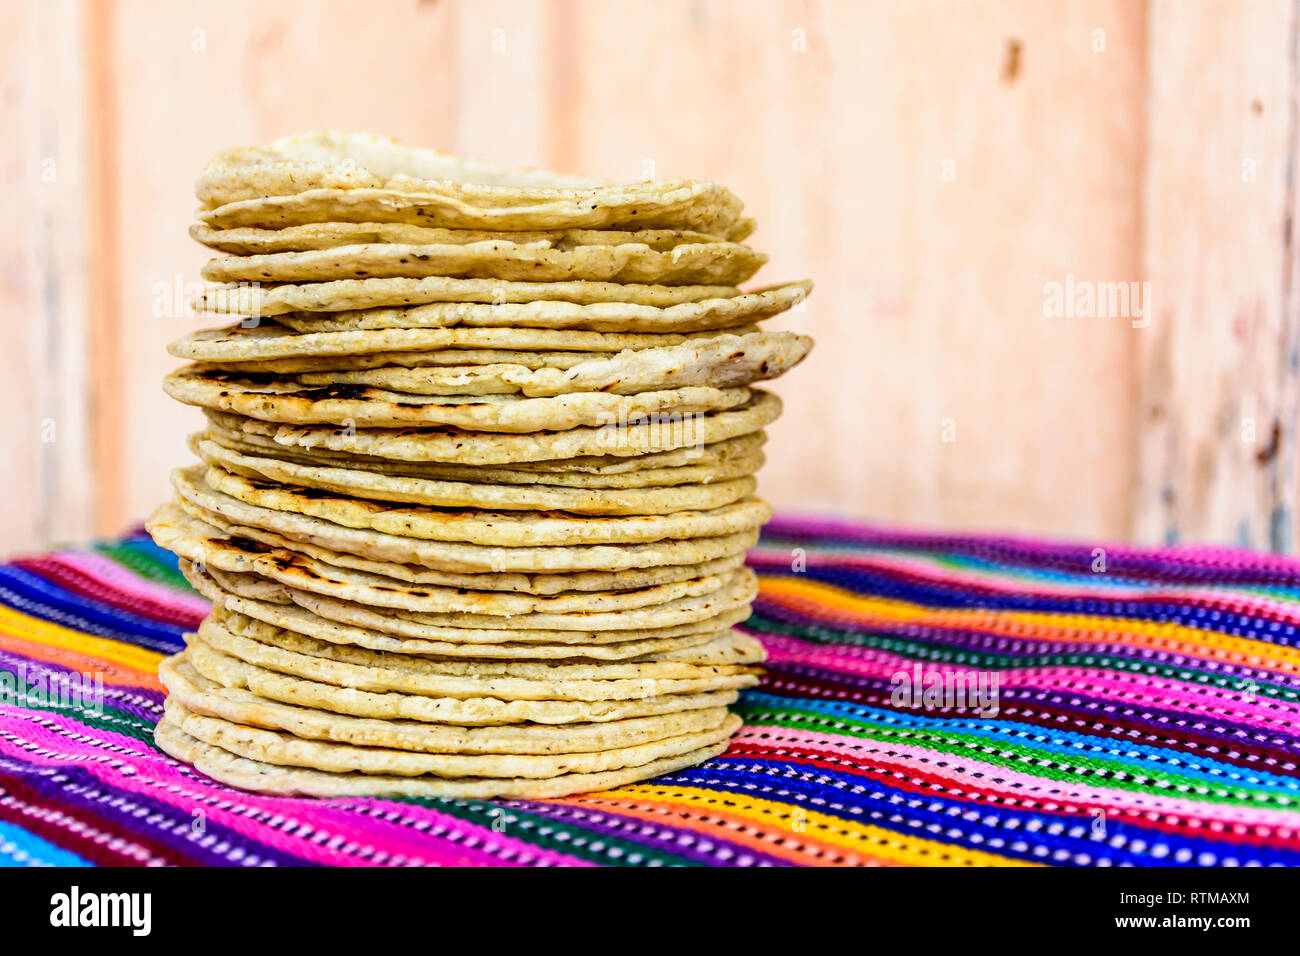 Stack of traditional handmade Guatemalan corn tortillas a staple food in Guatemala on colorful striped handwoven tablecloth Stock Photo